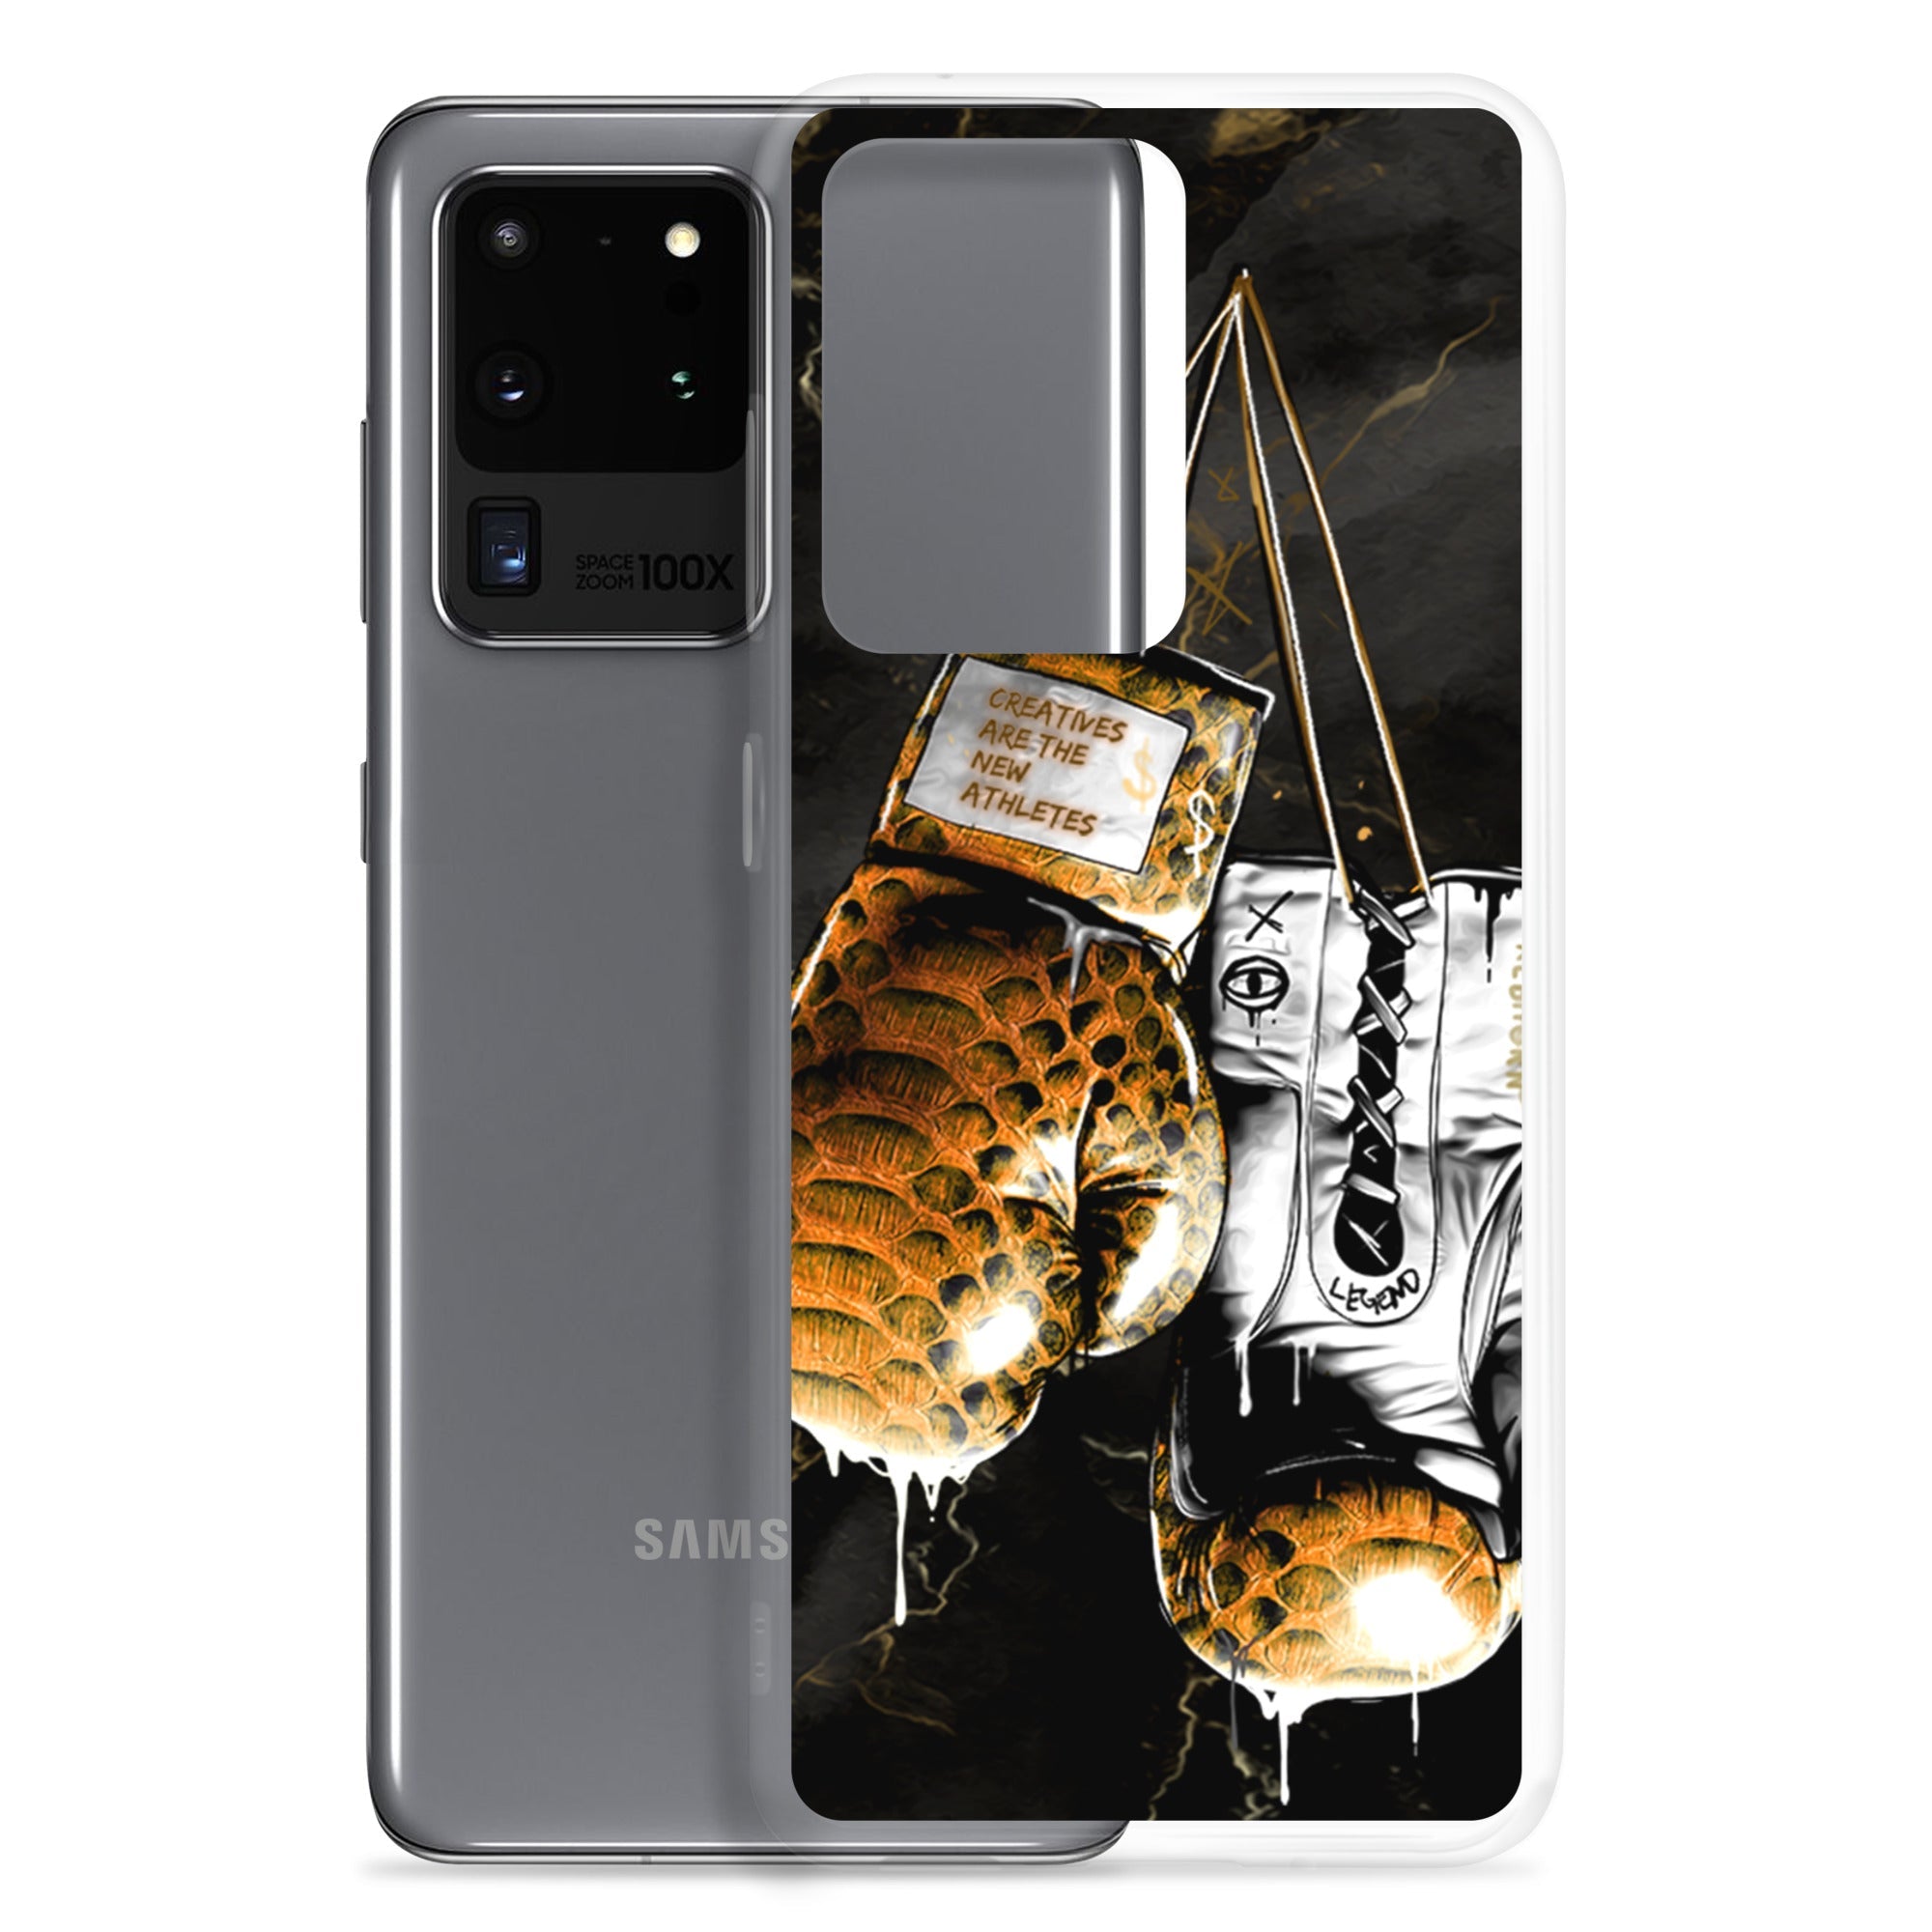 Creatives Are The New Athletes (Boxing Gloves) Samsung Case - REBHORN DESIGN